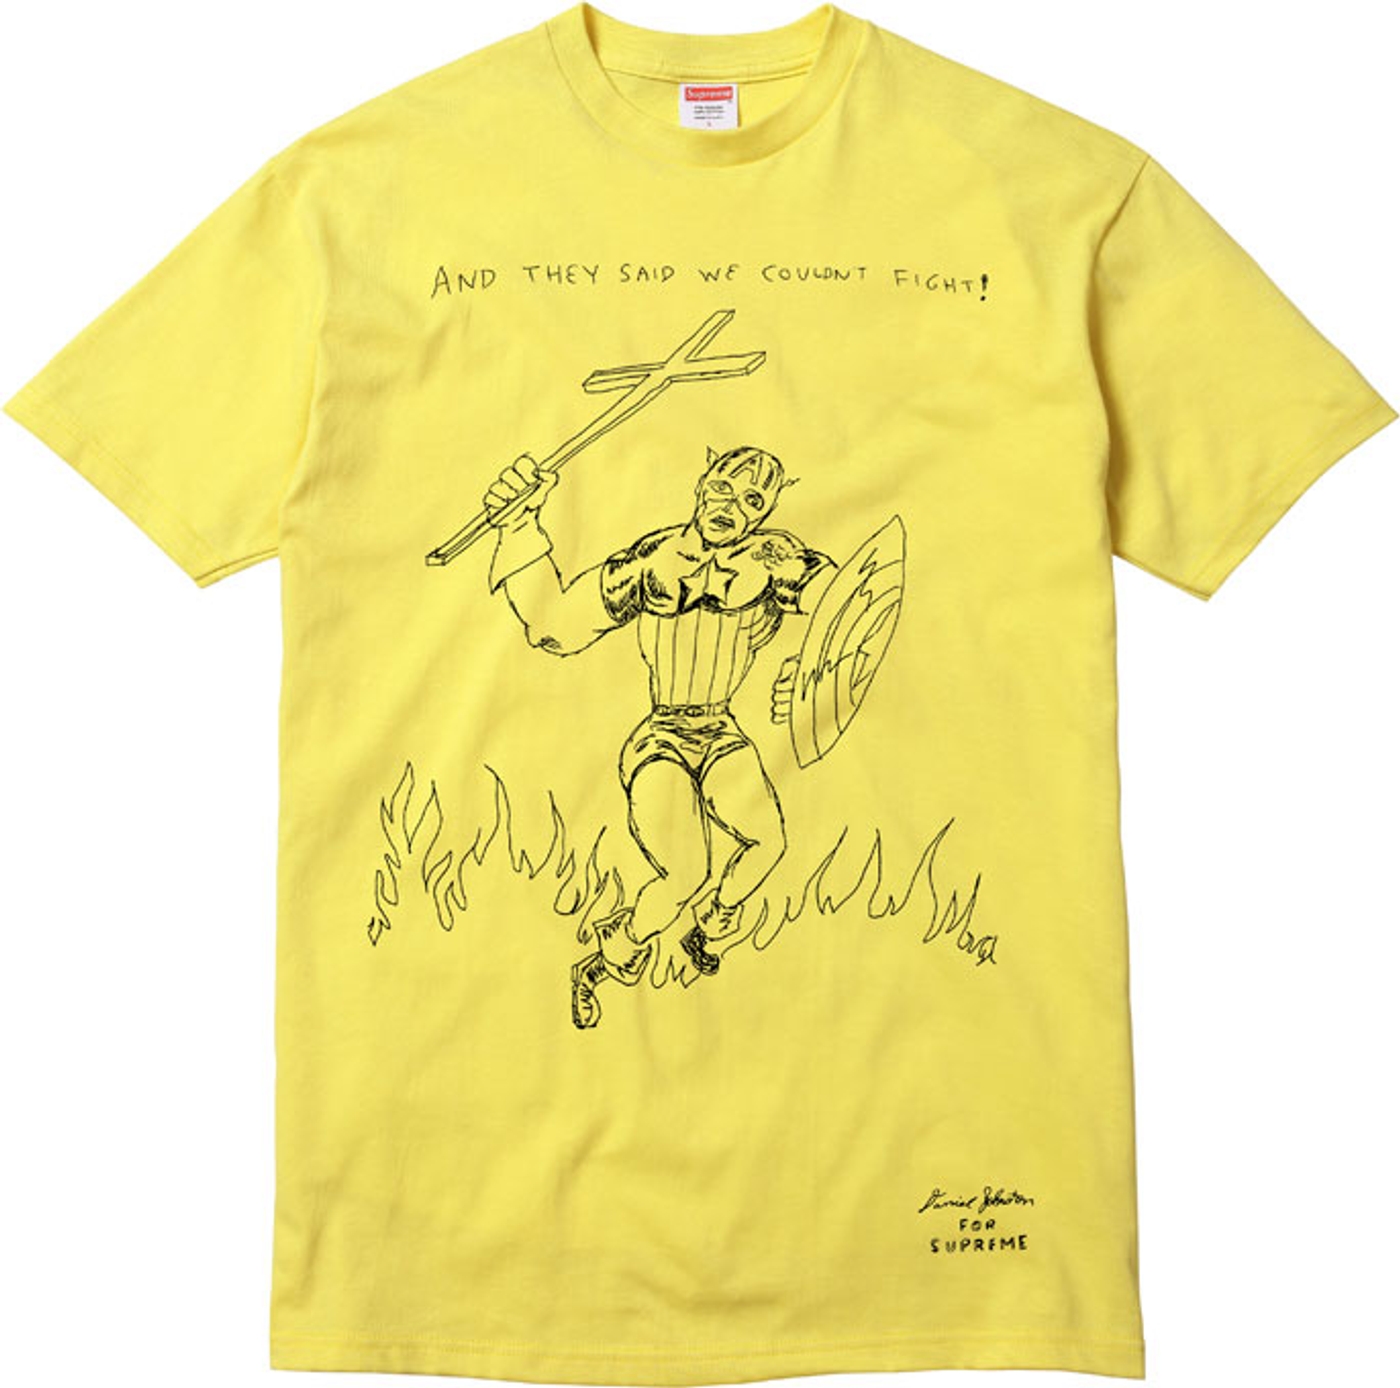 Captain Fight Tee 
All cotton classic Supreme t-shirt (2/9)